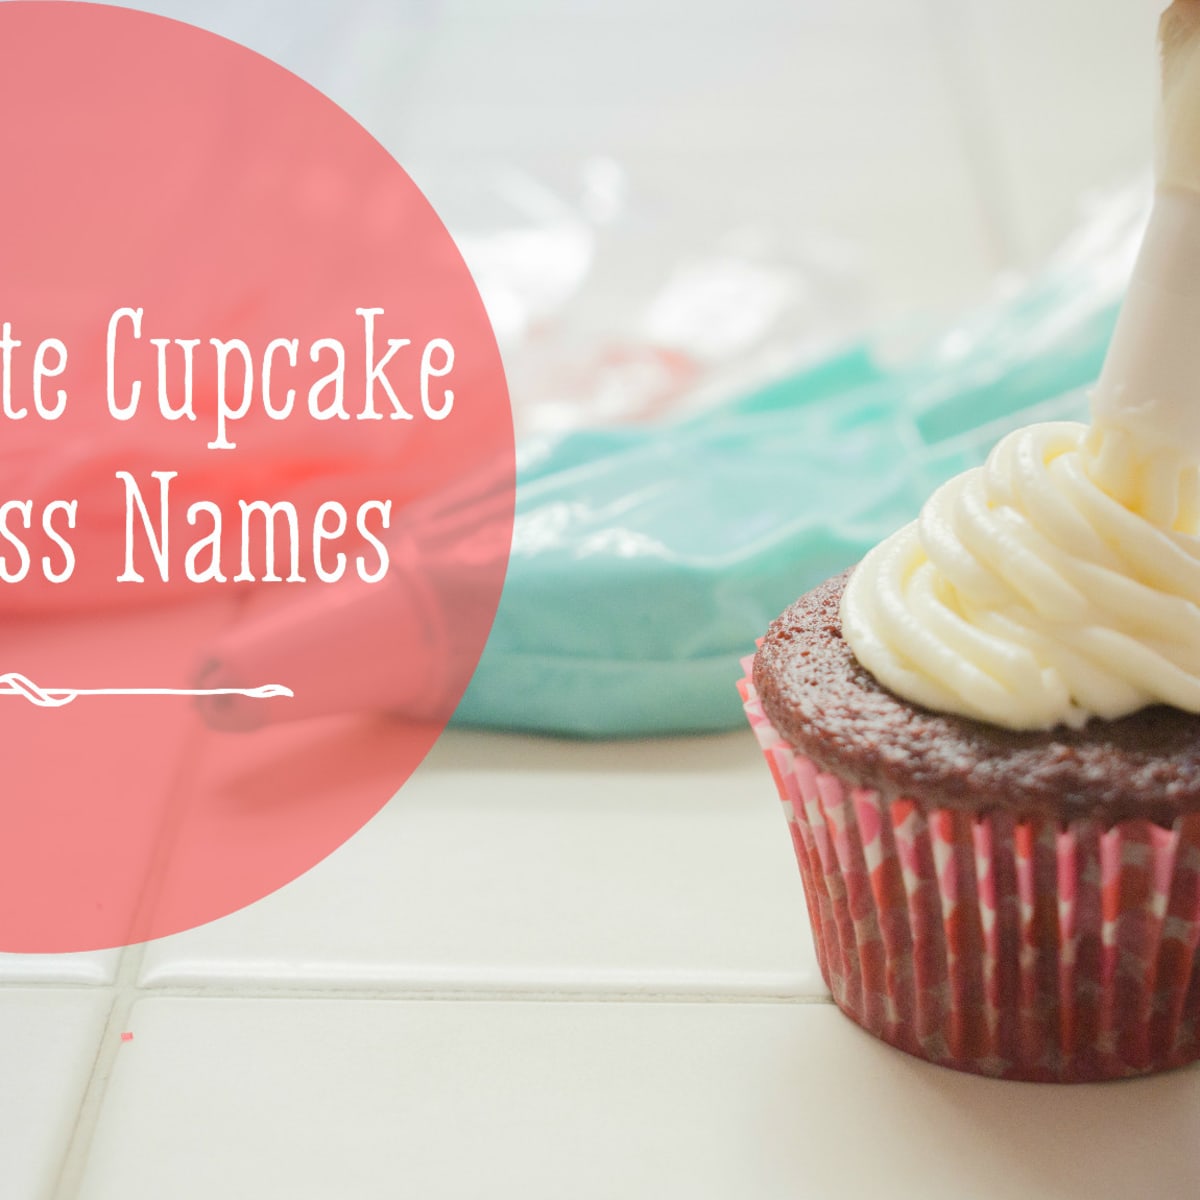 50 Cake And Cupcake Business Names Toughnickel